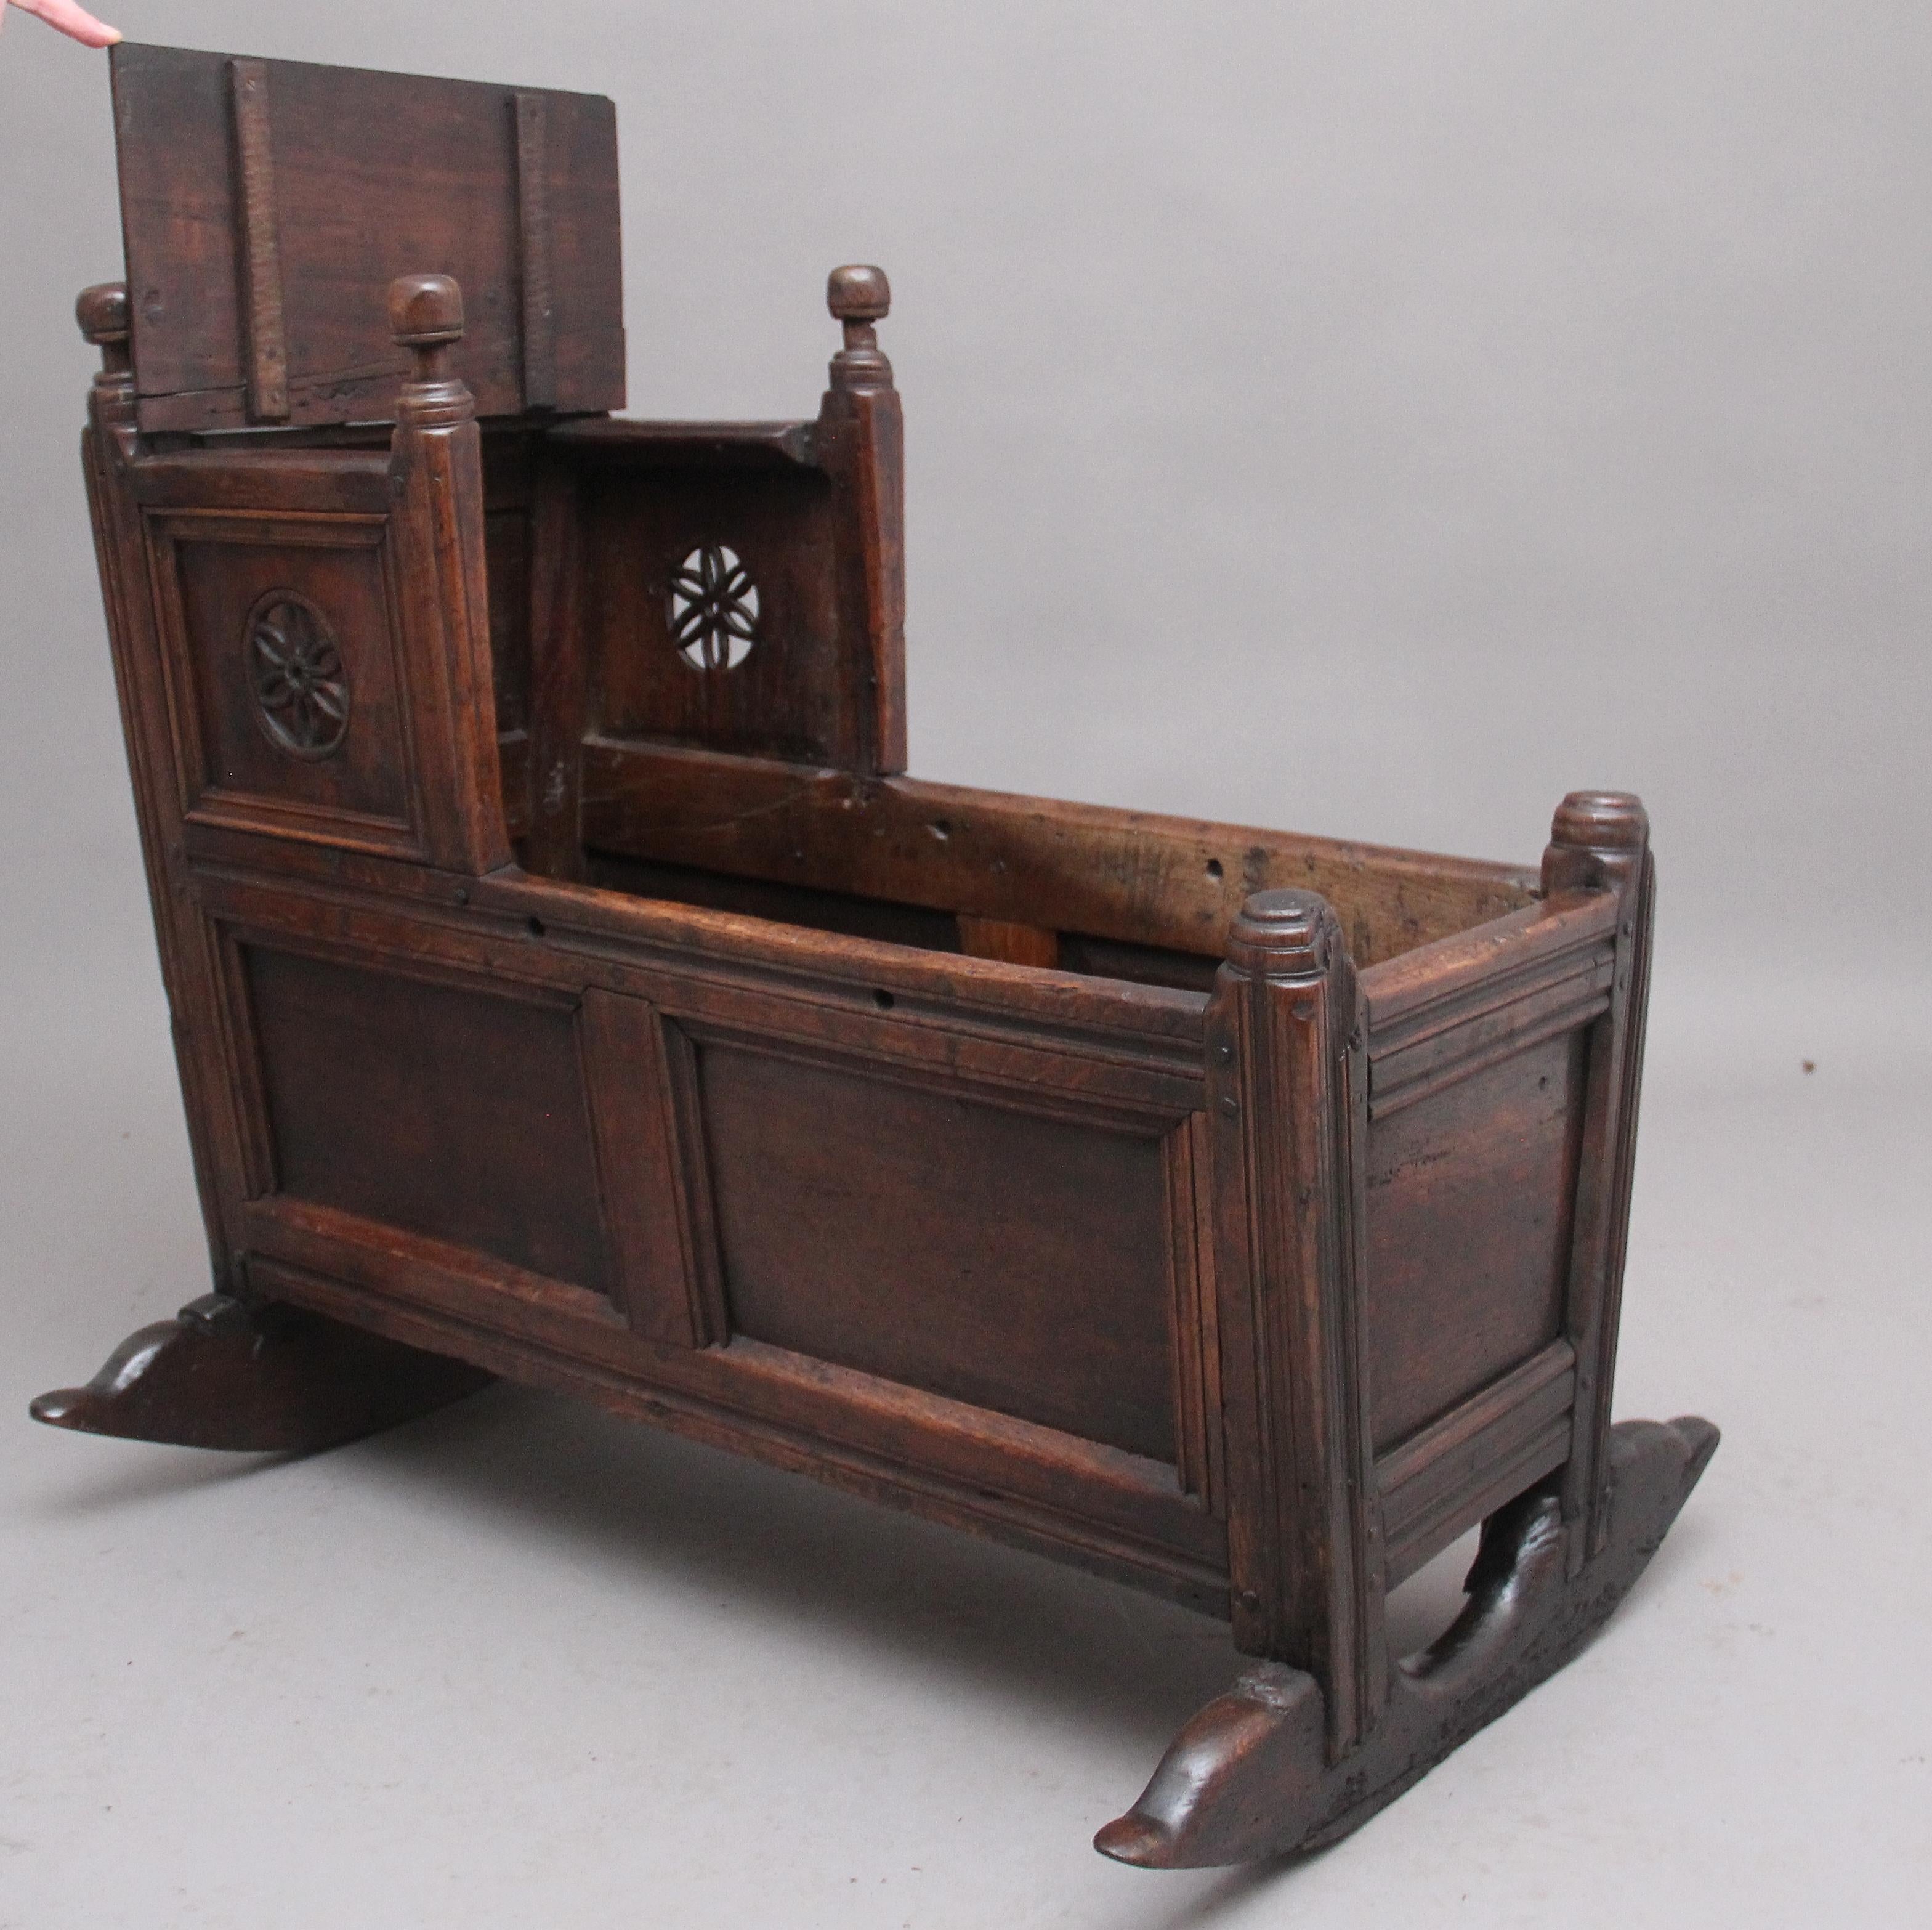 17th century oak cradle with a raised canopy with a hinged lift up lid, decorative pierced carved flower head on each side, panelled sides, at one end of the cradle the top panel is carved with the date 1674 and initials A K. Raised on shaped rocker